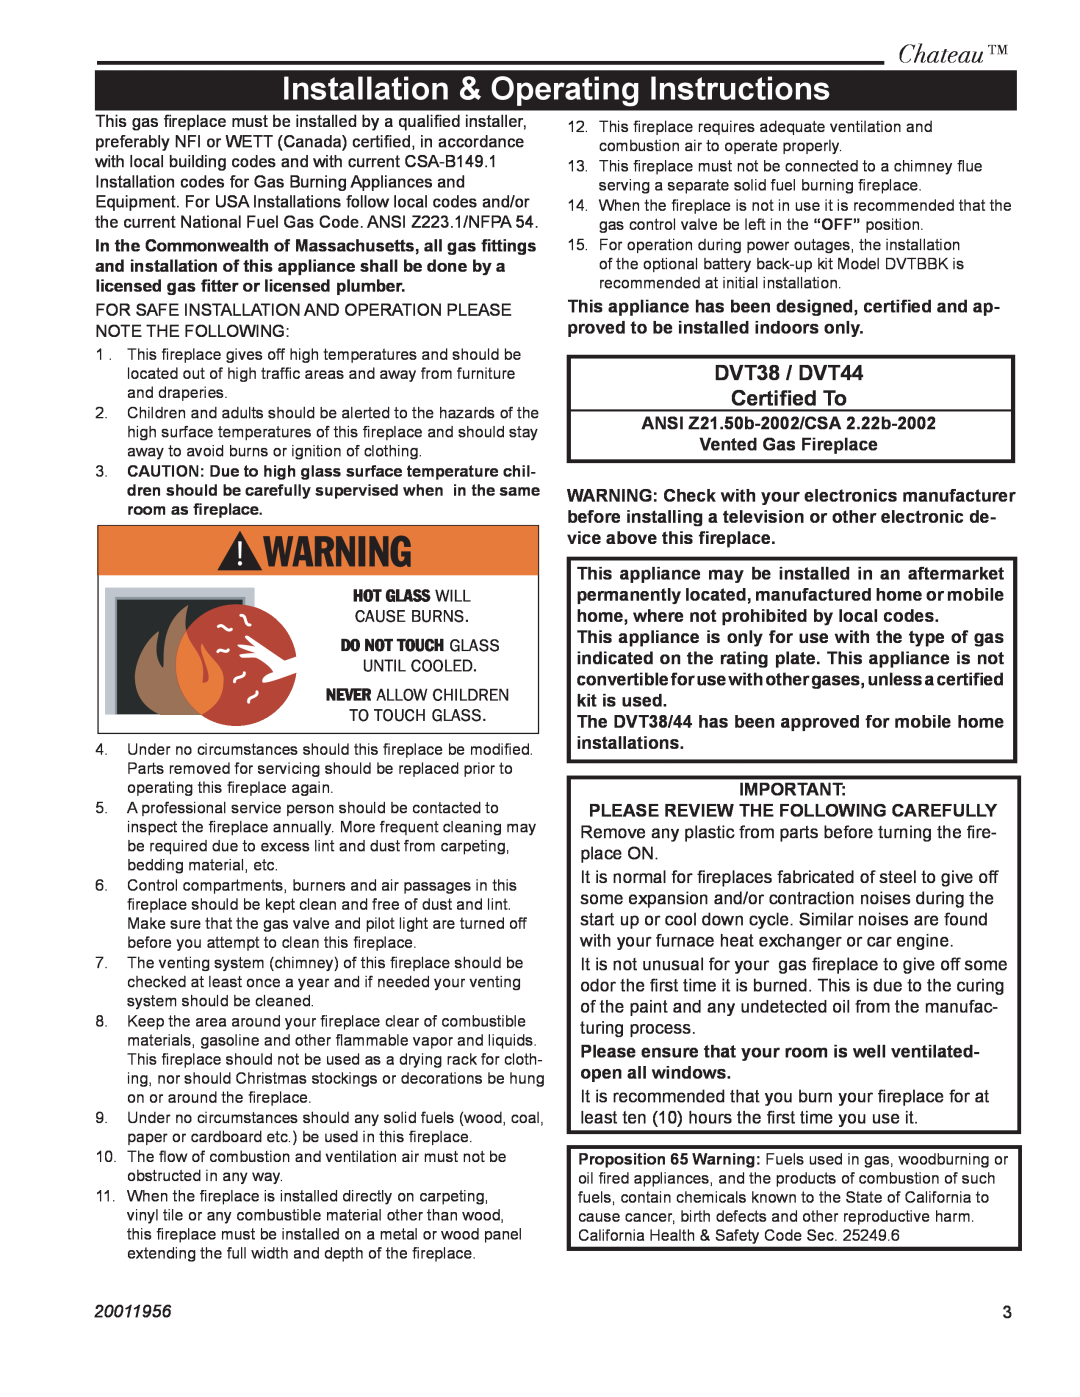 Vermont Casting Installation & Operating Instructions, Chateau, DVT38 / DVT44 Certiﬁed To, 20011956 